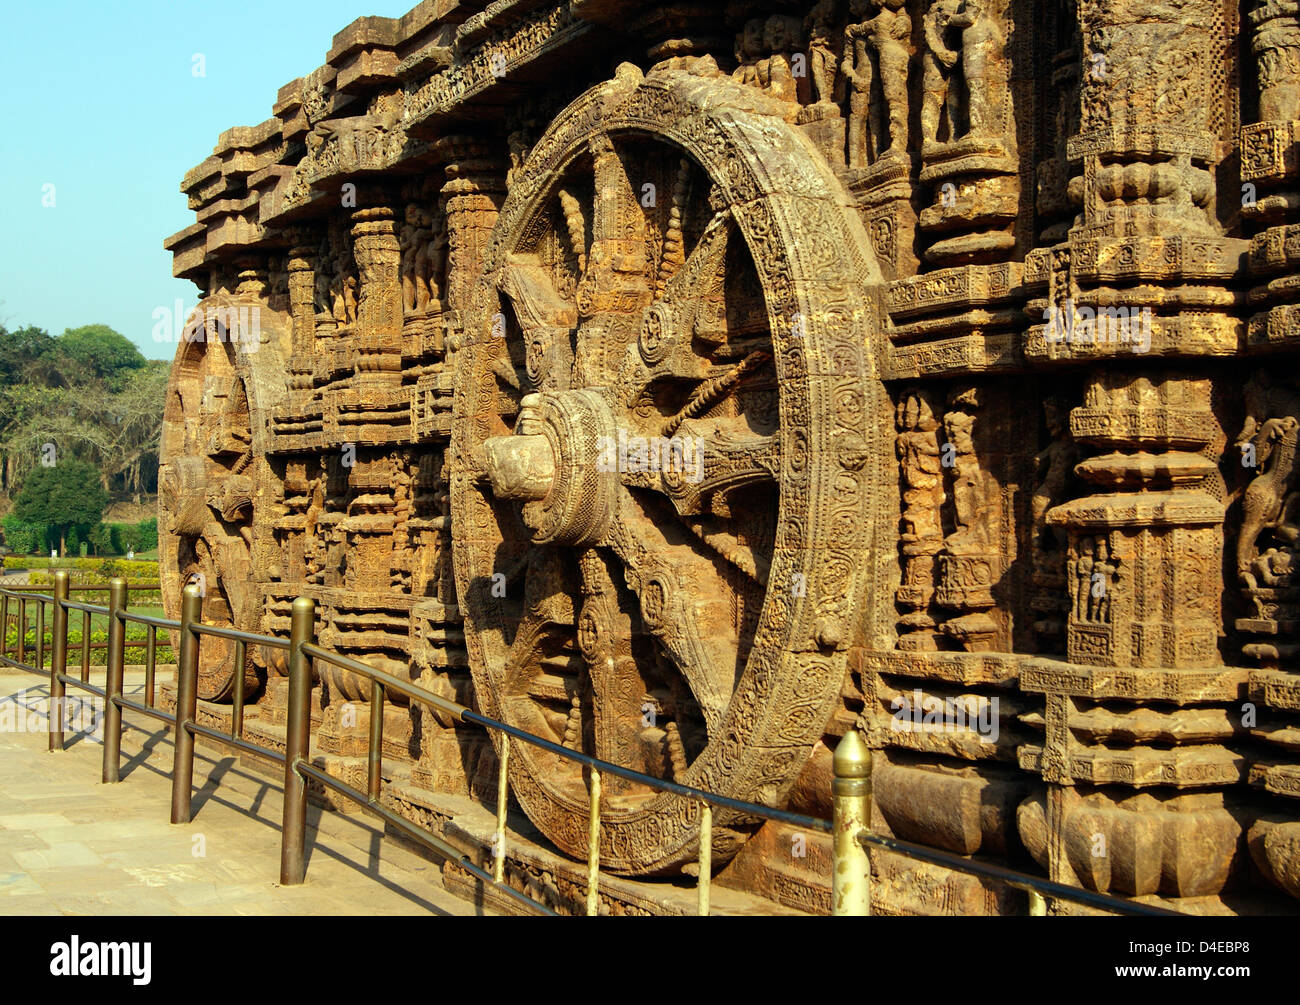 Carved Sandstone Chariots Wheels View on Konark Sun Temple. Chariot Wheel of Konark Temple resemble Sun God Chariots Stock Photo